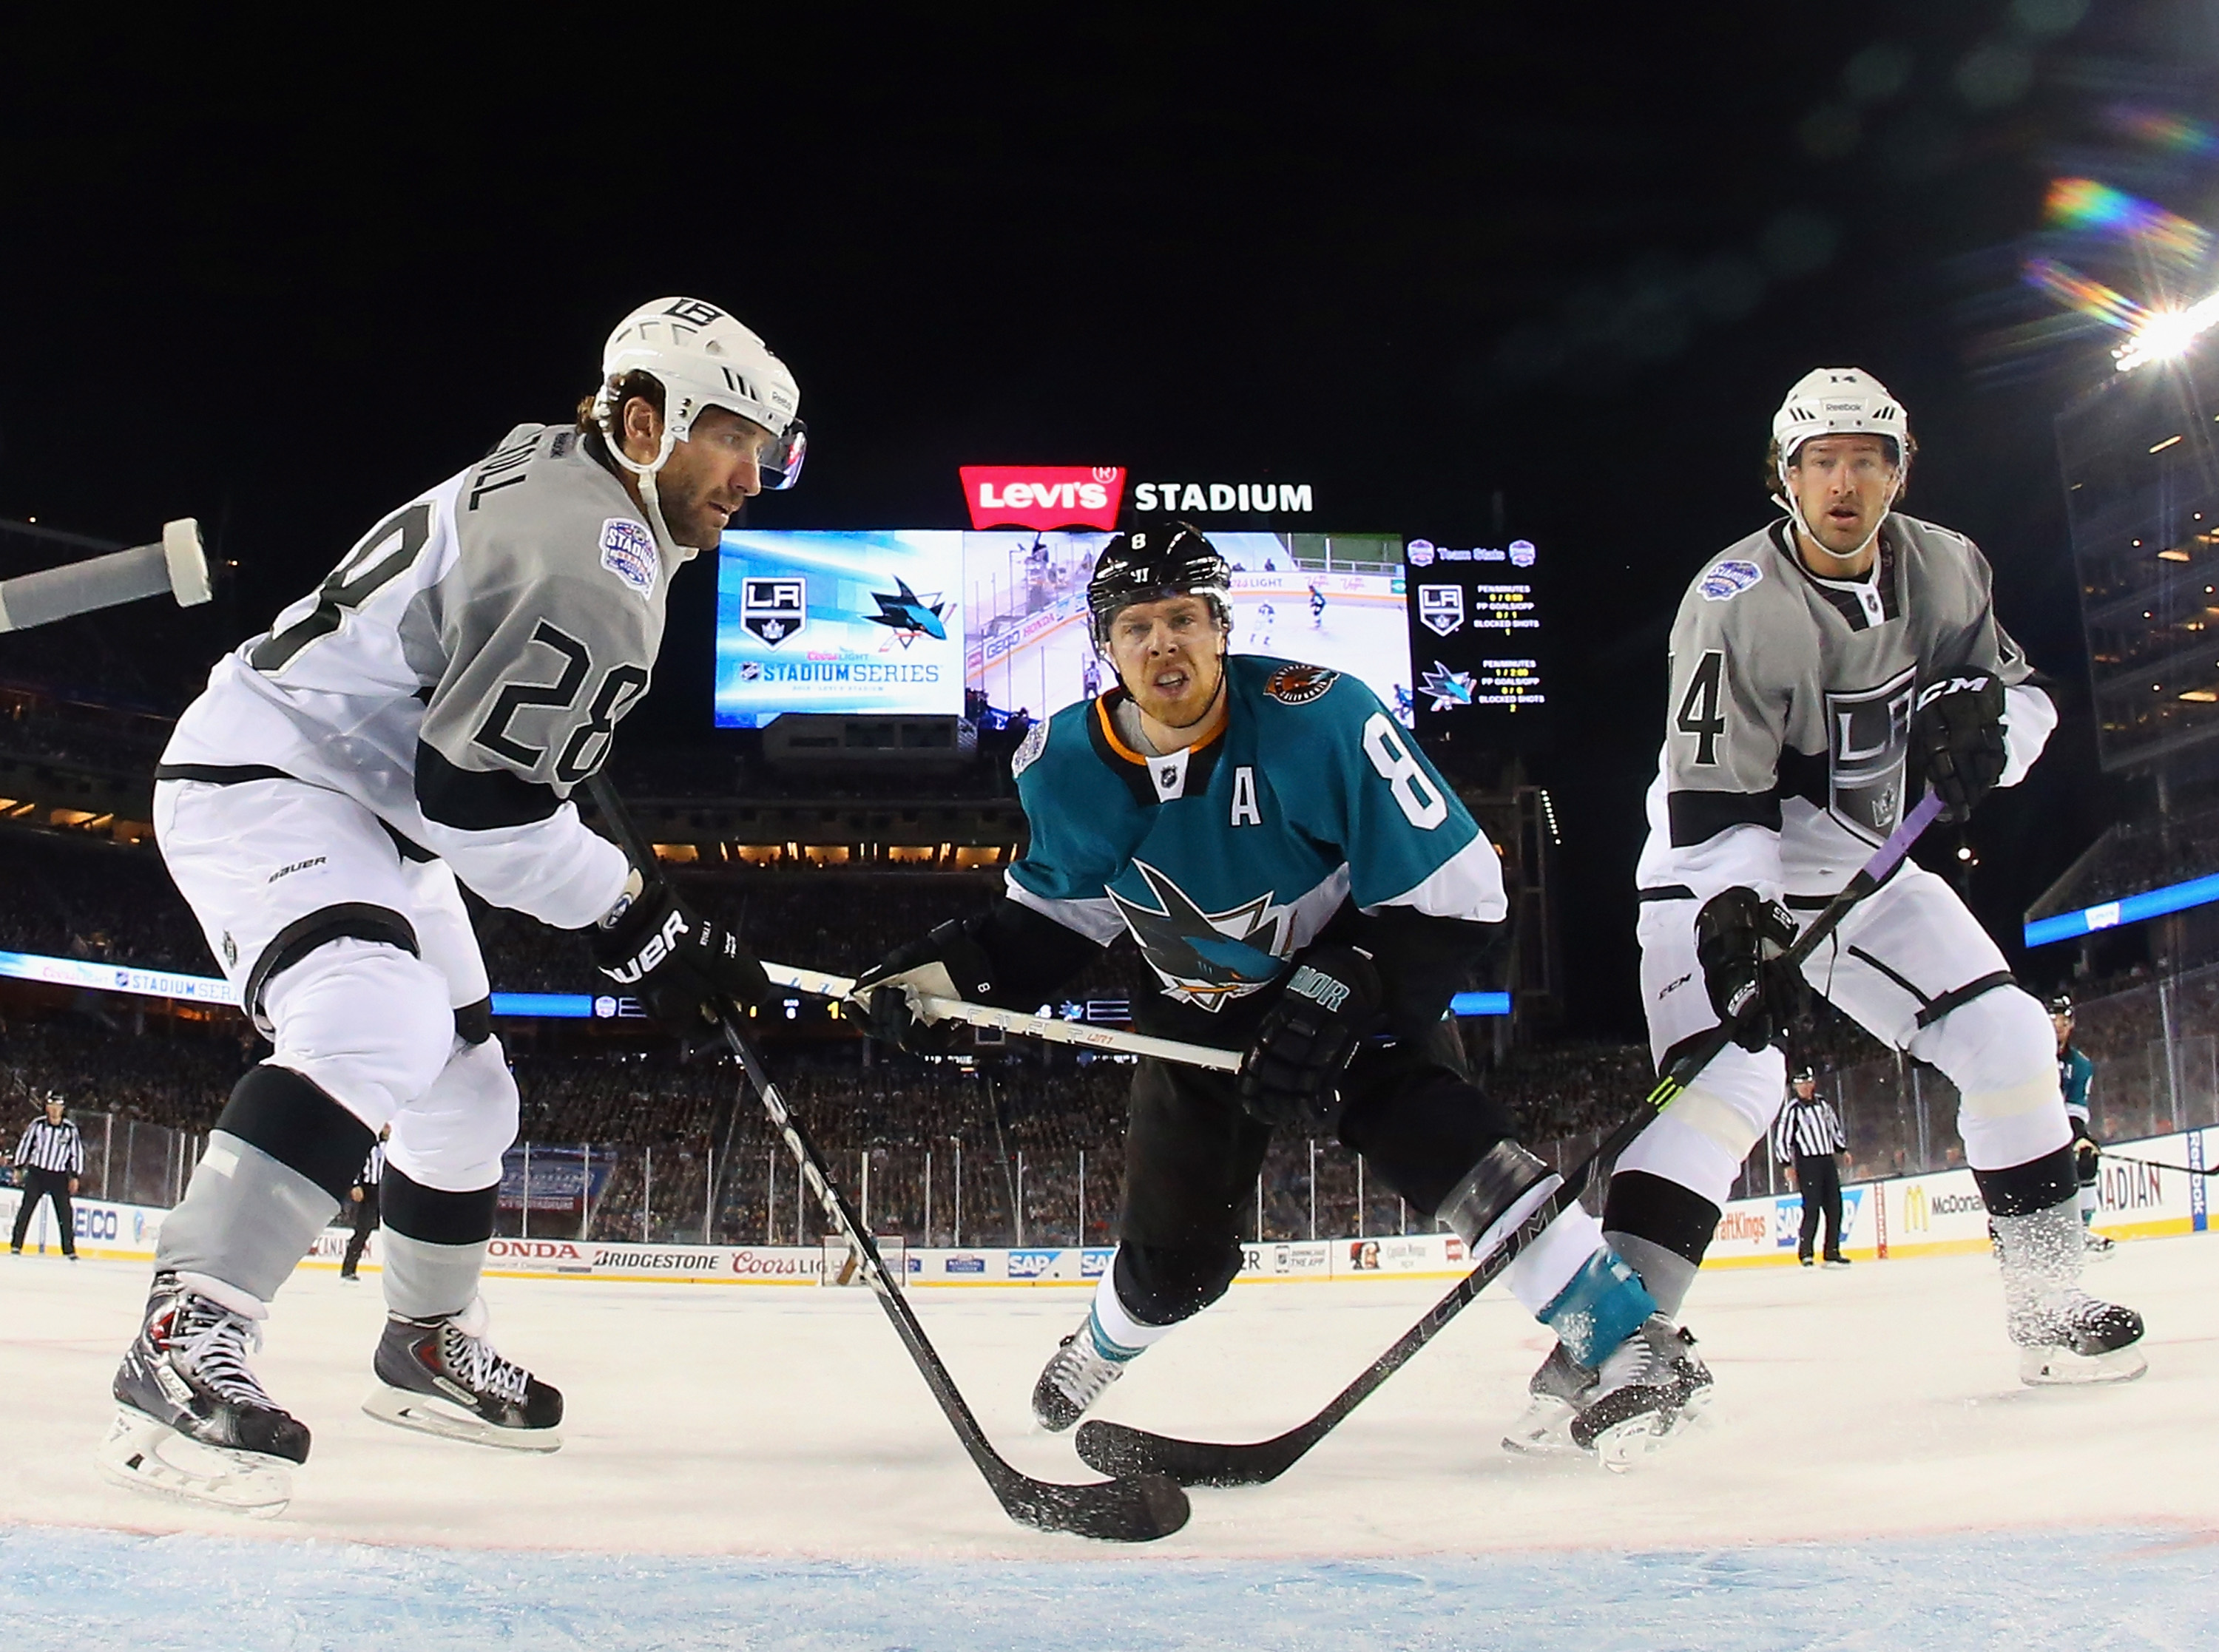 WATCH LIVE: Kings at Sharks from Levi's Stadium - NBC Sports